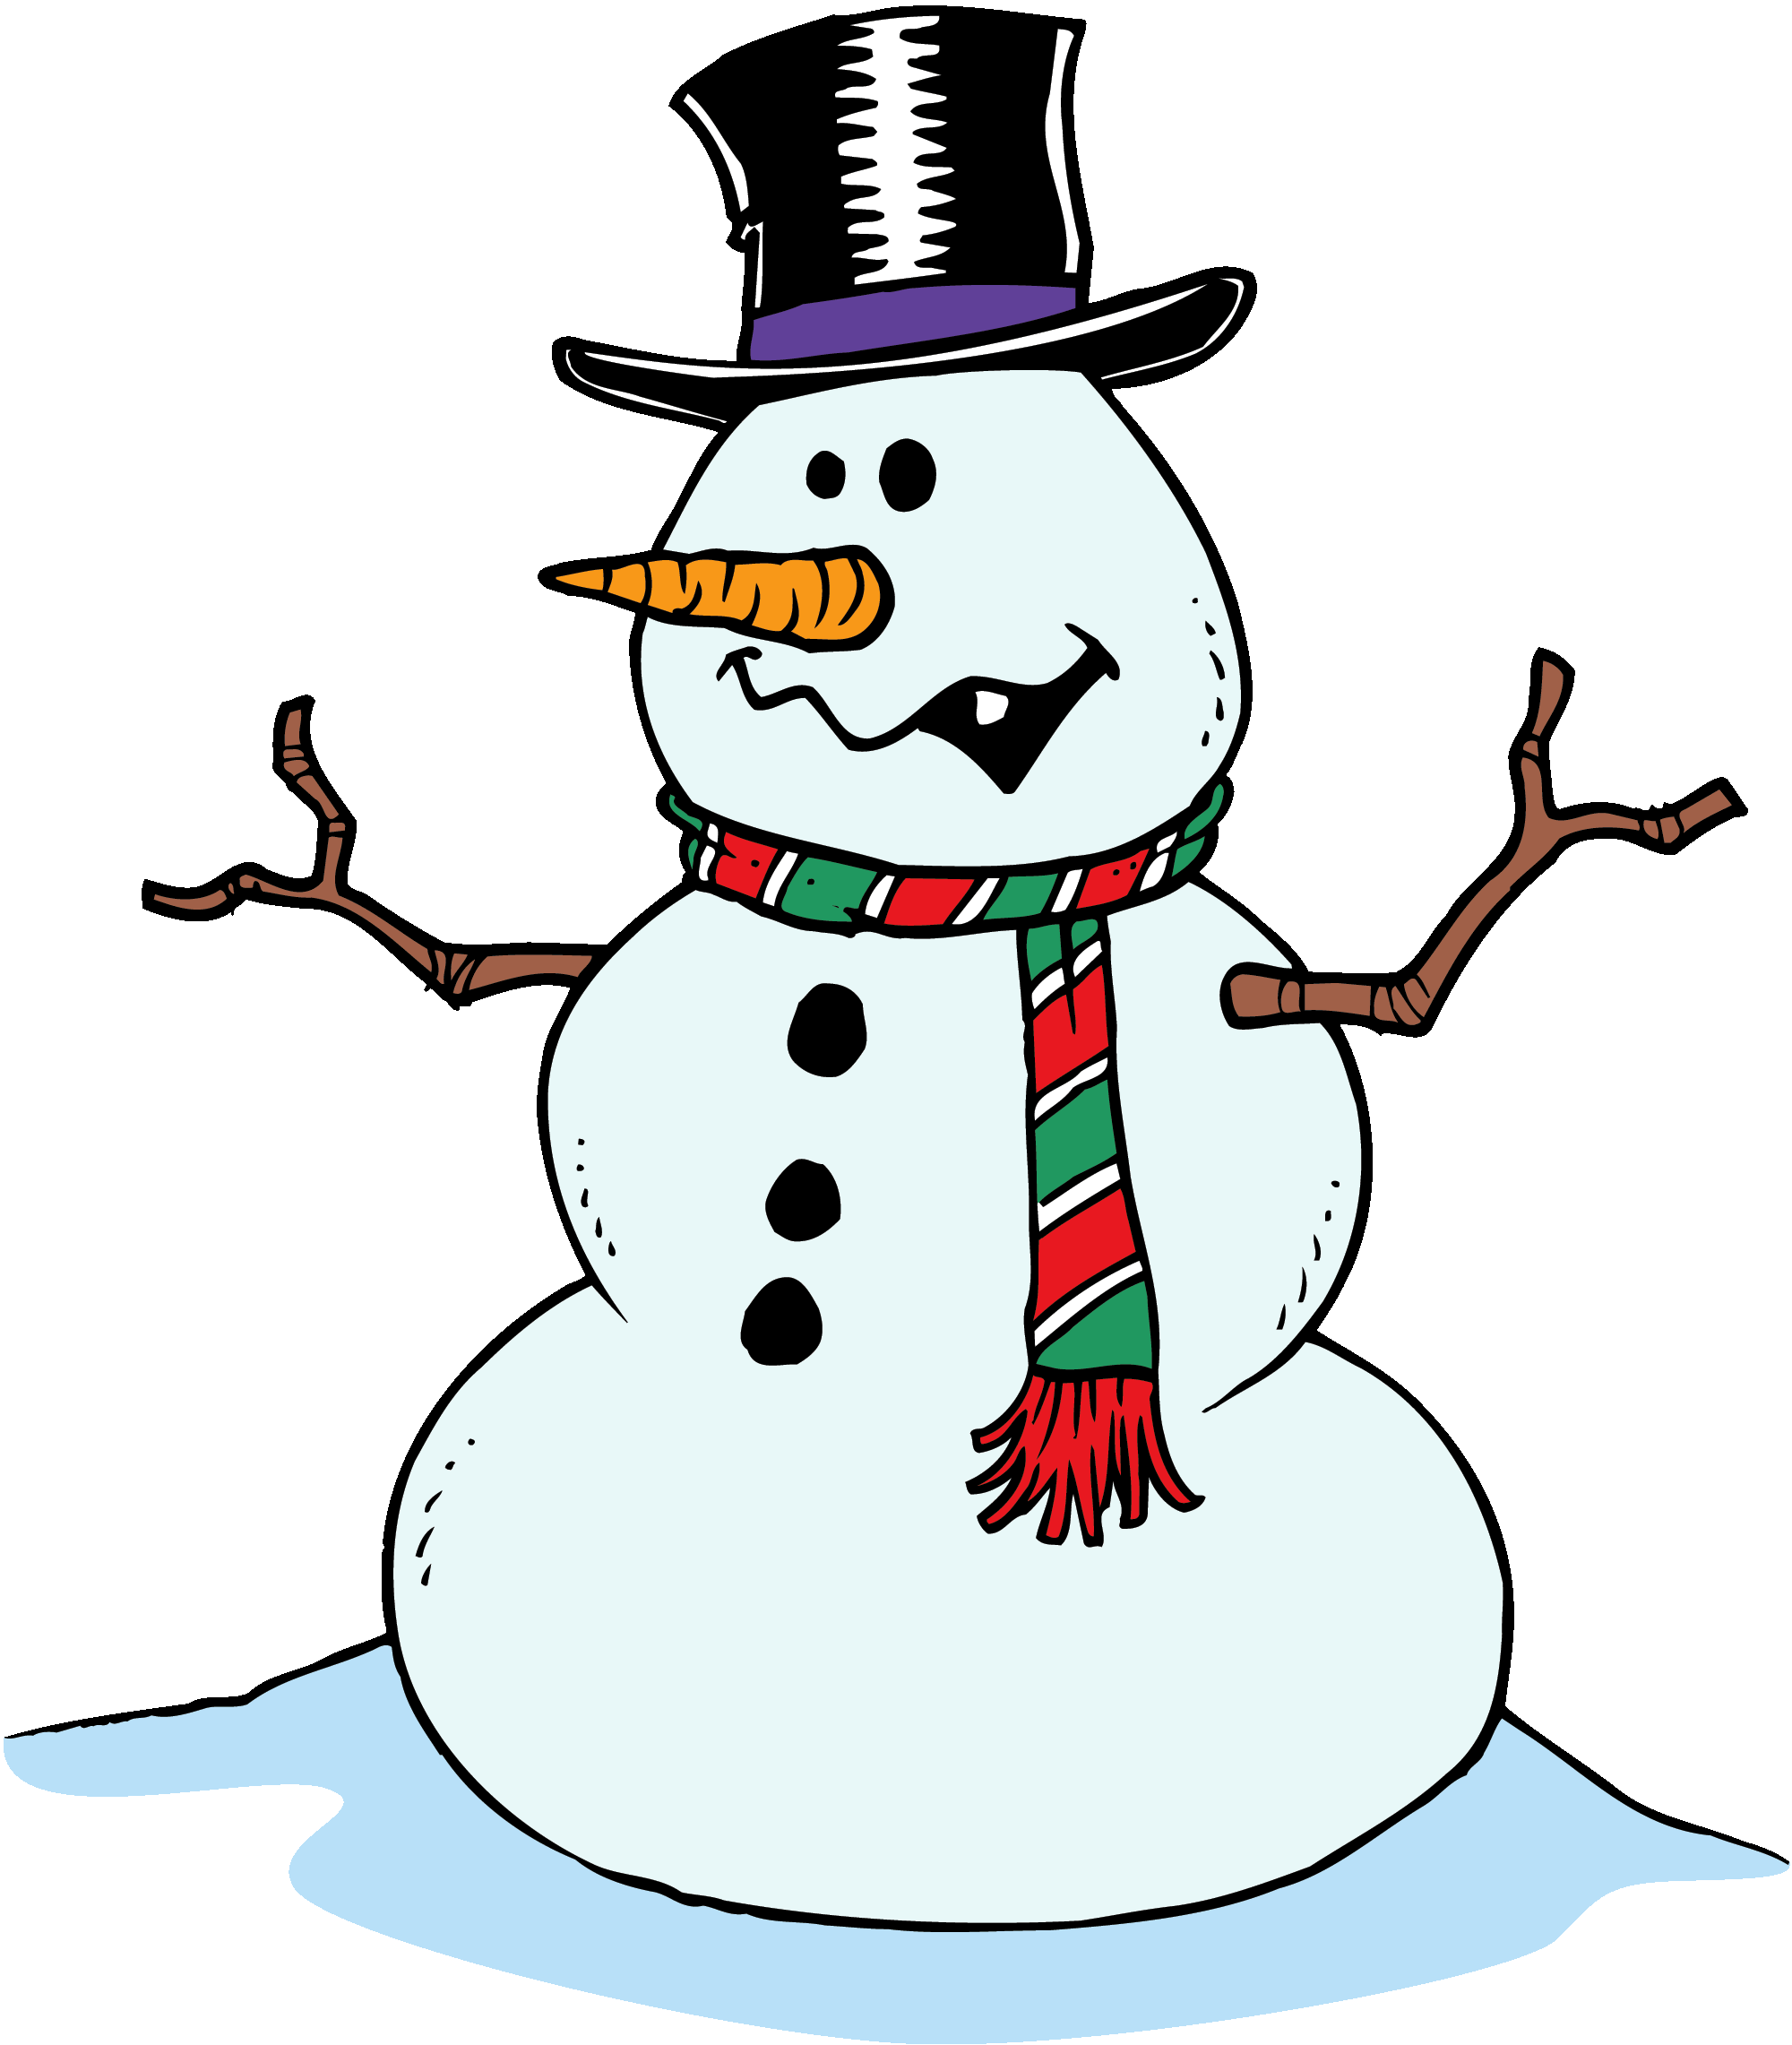 Winter Snowman Clip Art Drawing Free Image Download 